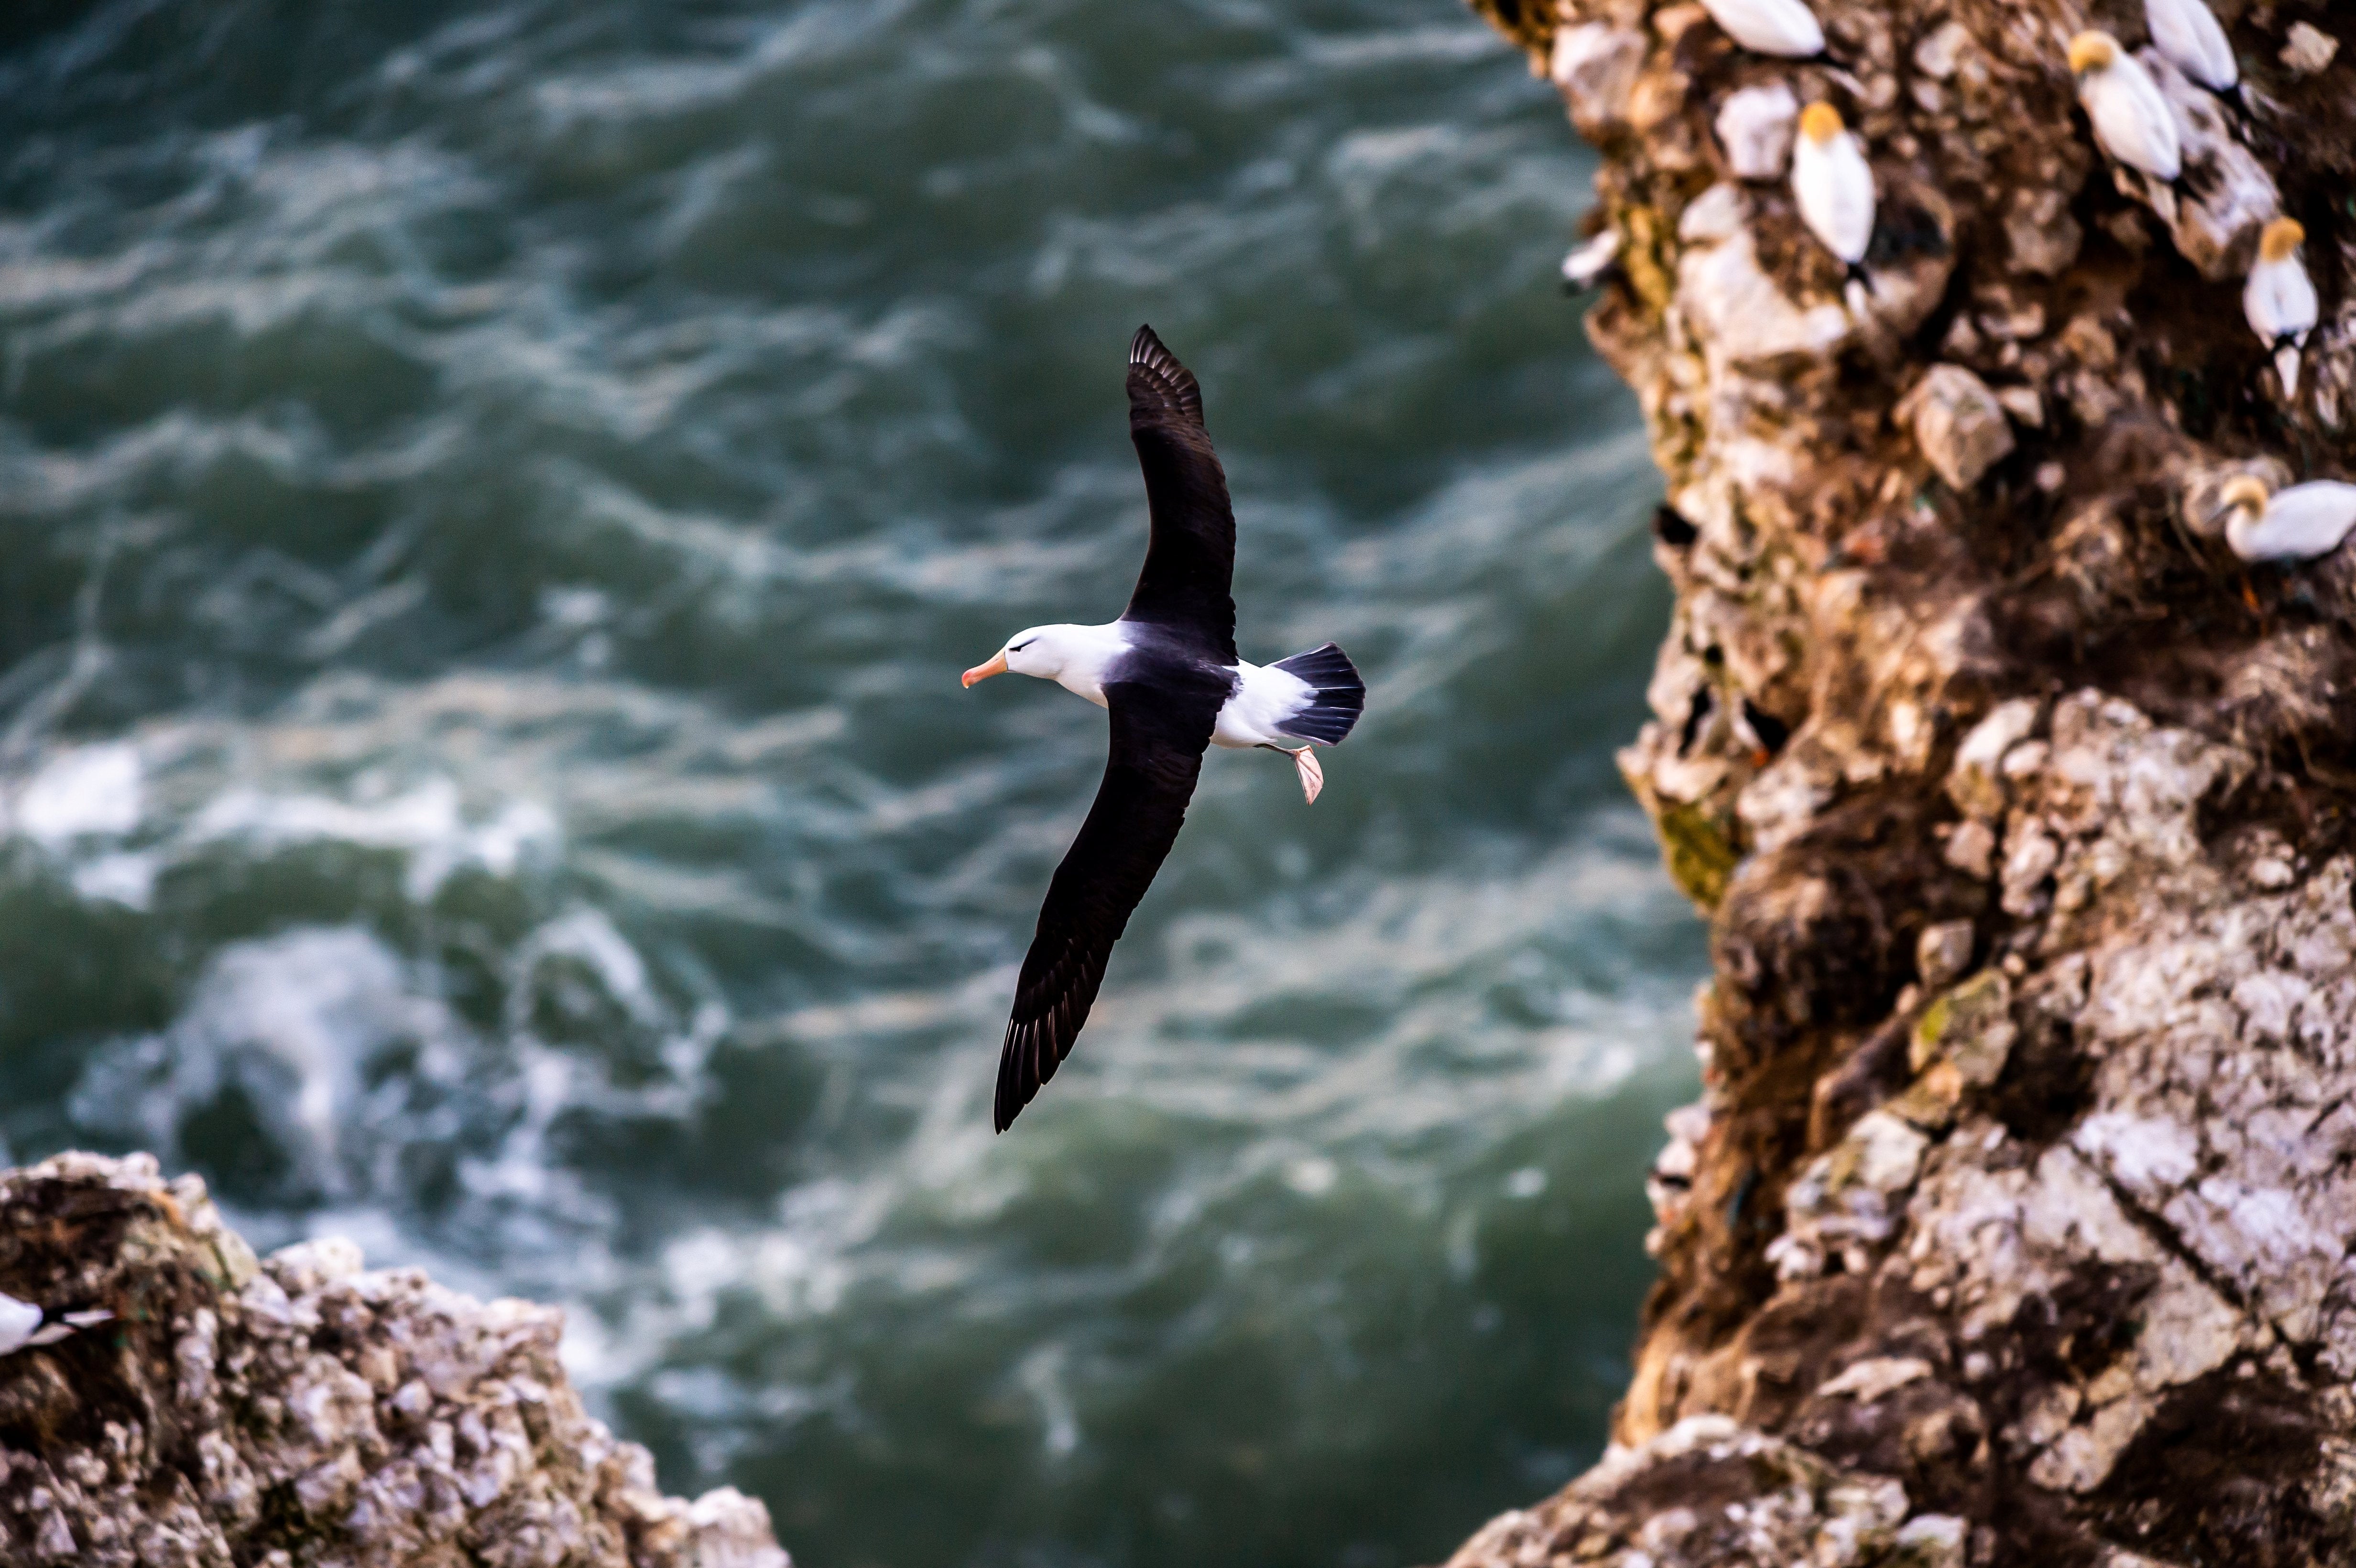 Albie the albatross was regularly see at the Bempton Cliffs last summer